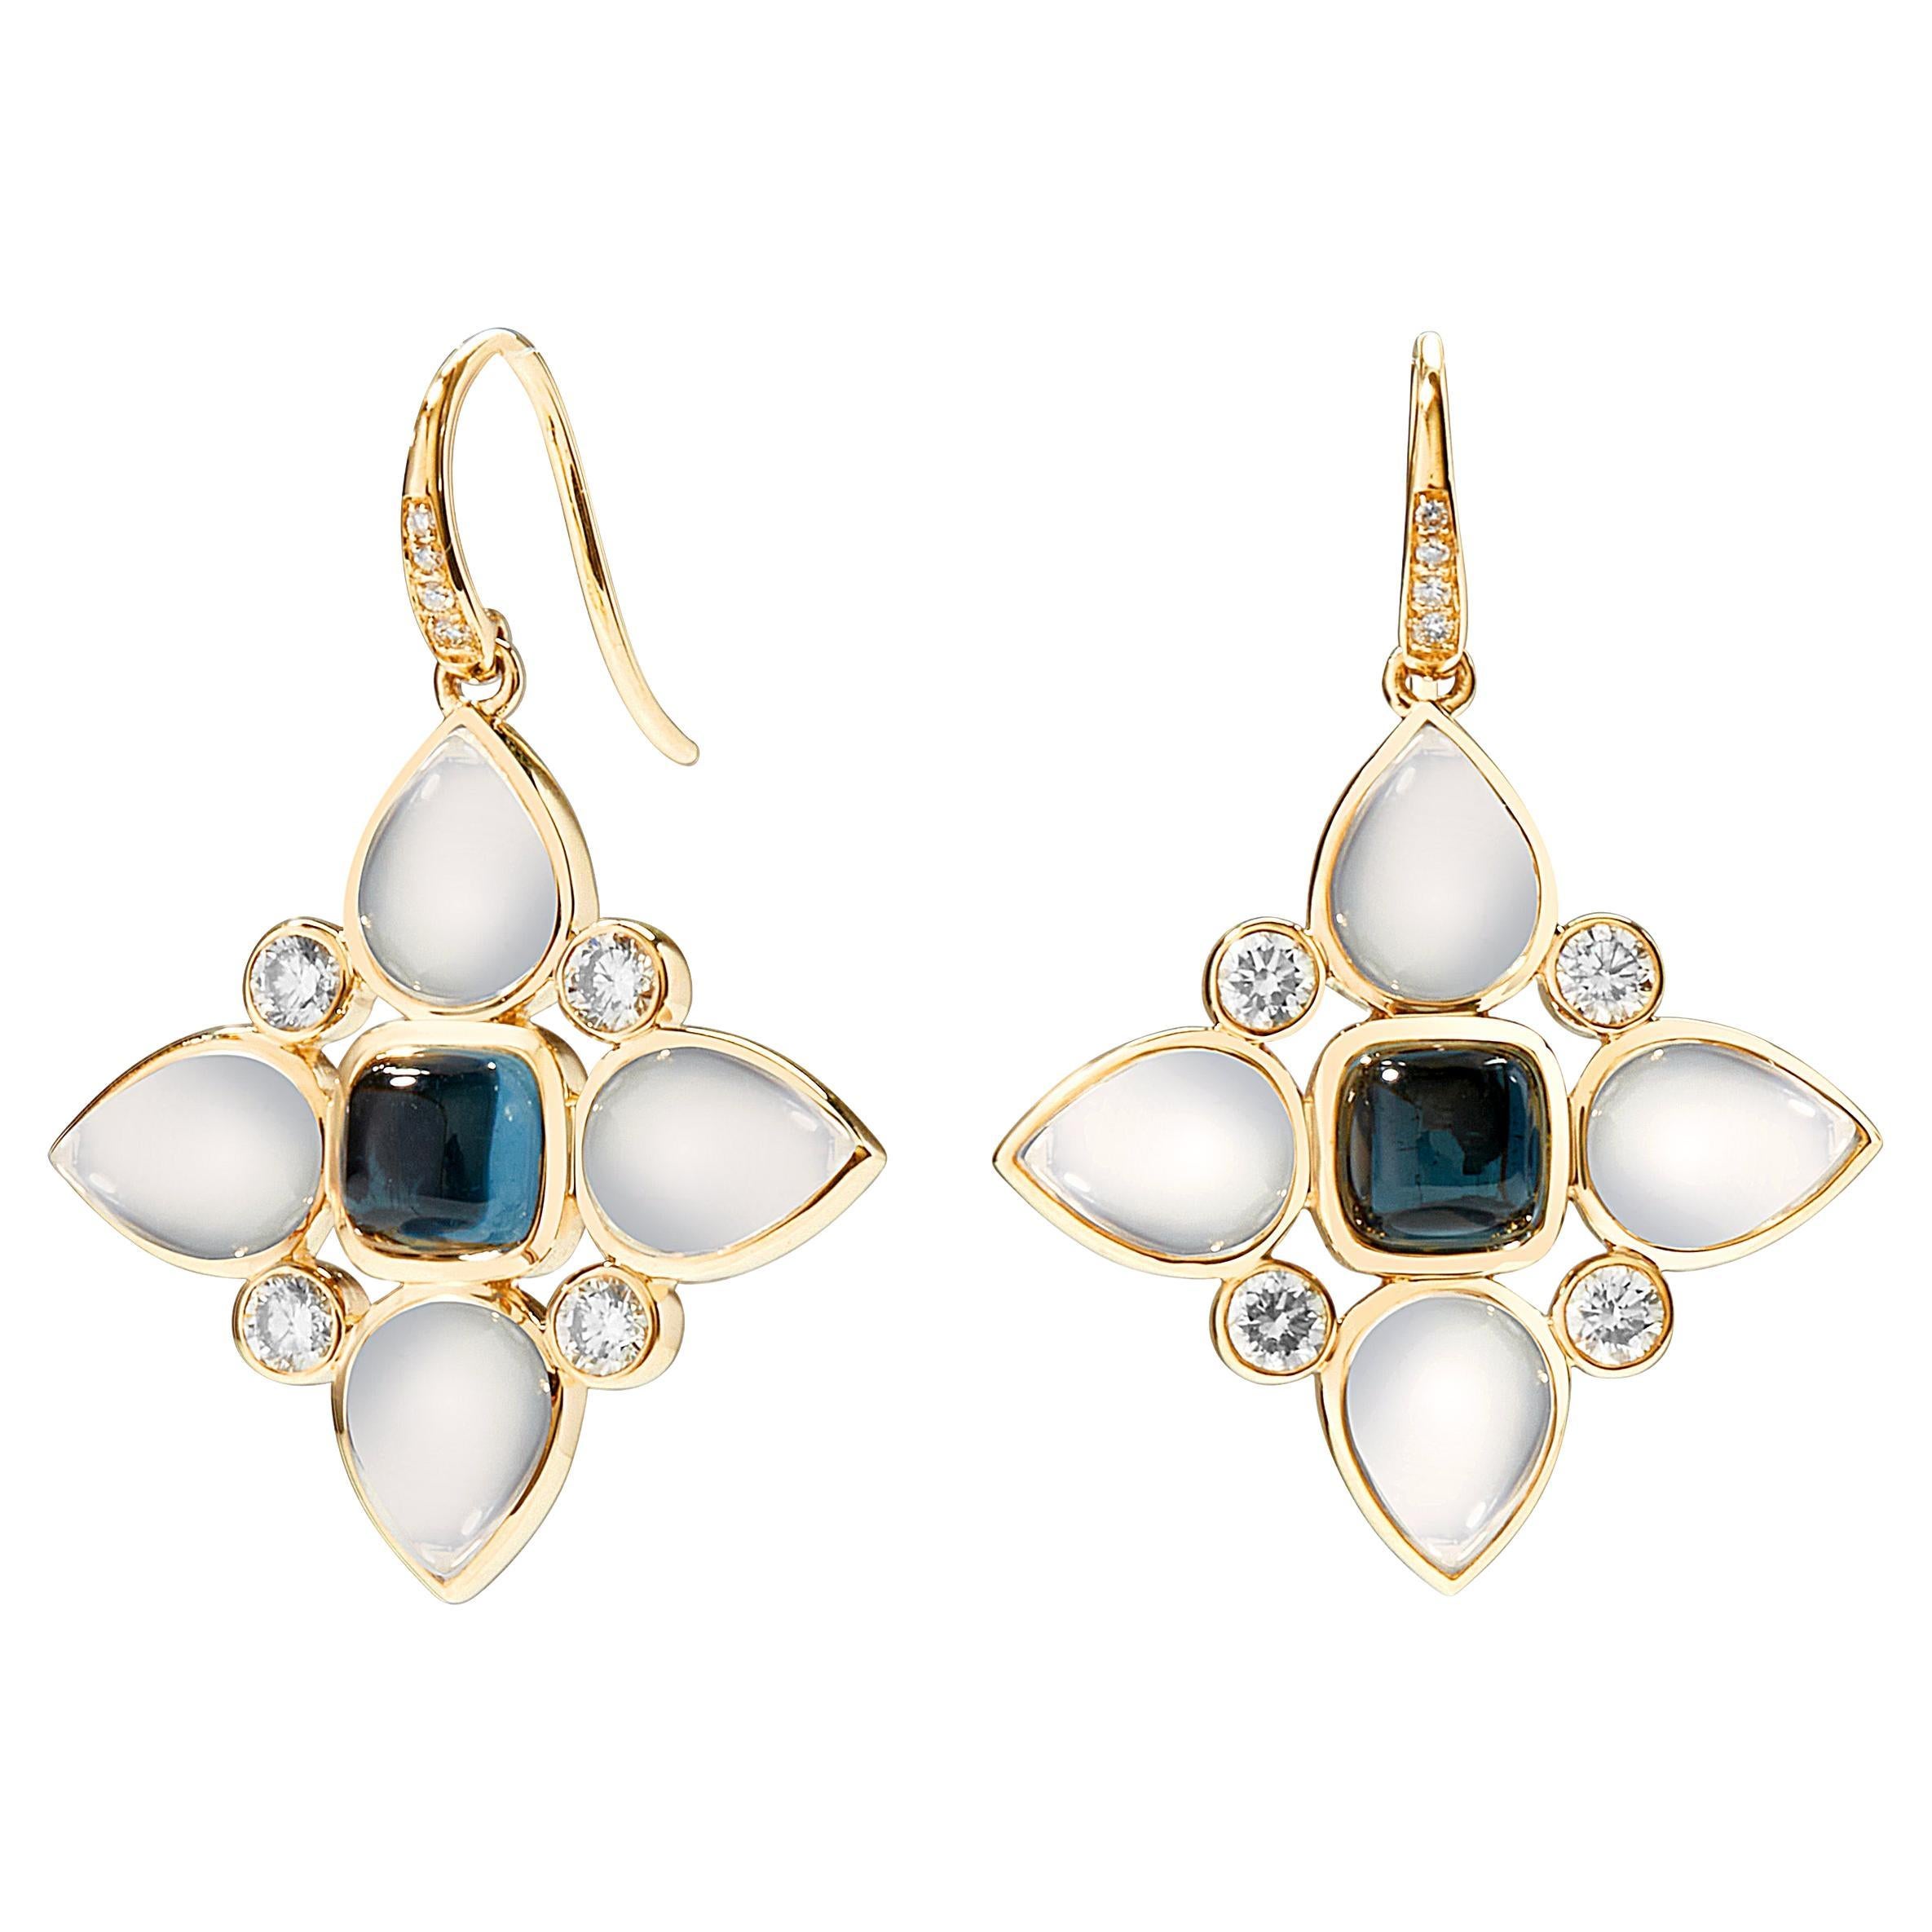 Syna Yellow Gold Moon Quartz, London Blue Topaz and Champagne Diamonds Earrings